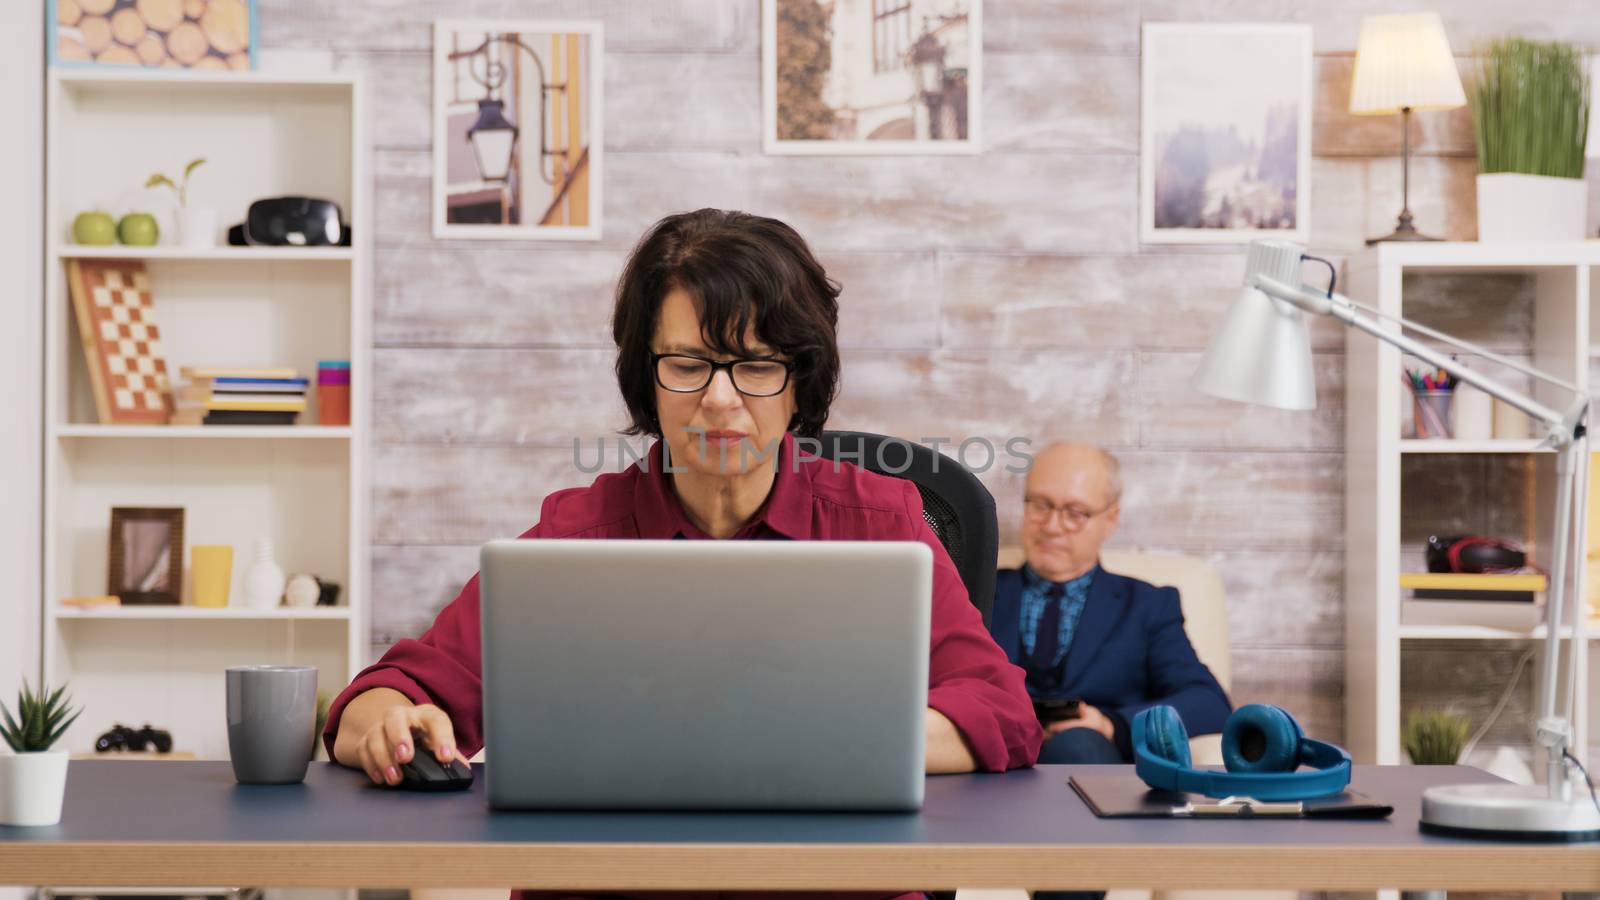 Elderly age woman taking a sip of coffee while browsing on laptop. Old man relaxing on sofa in the background.